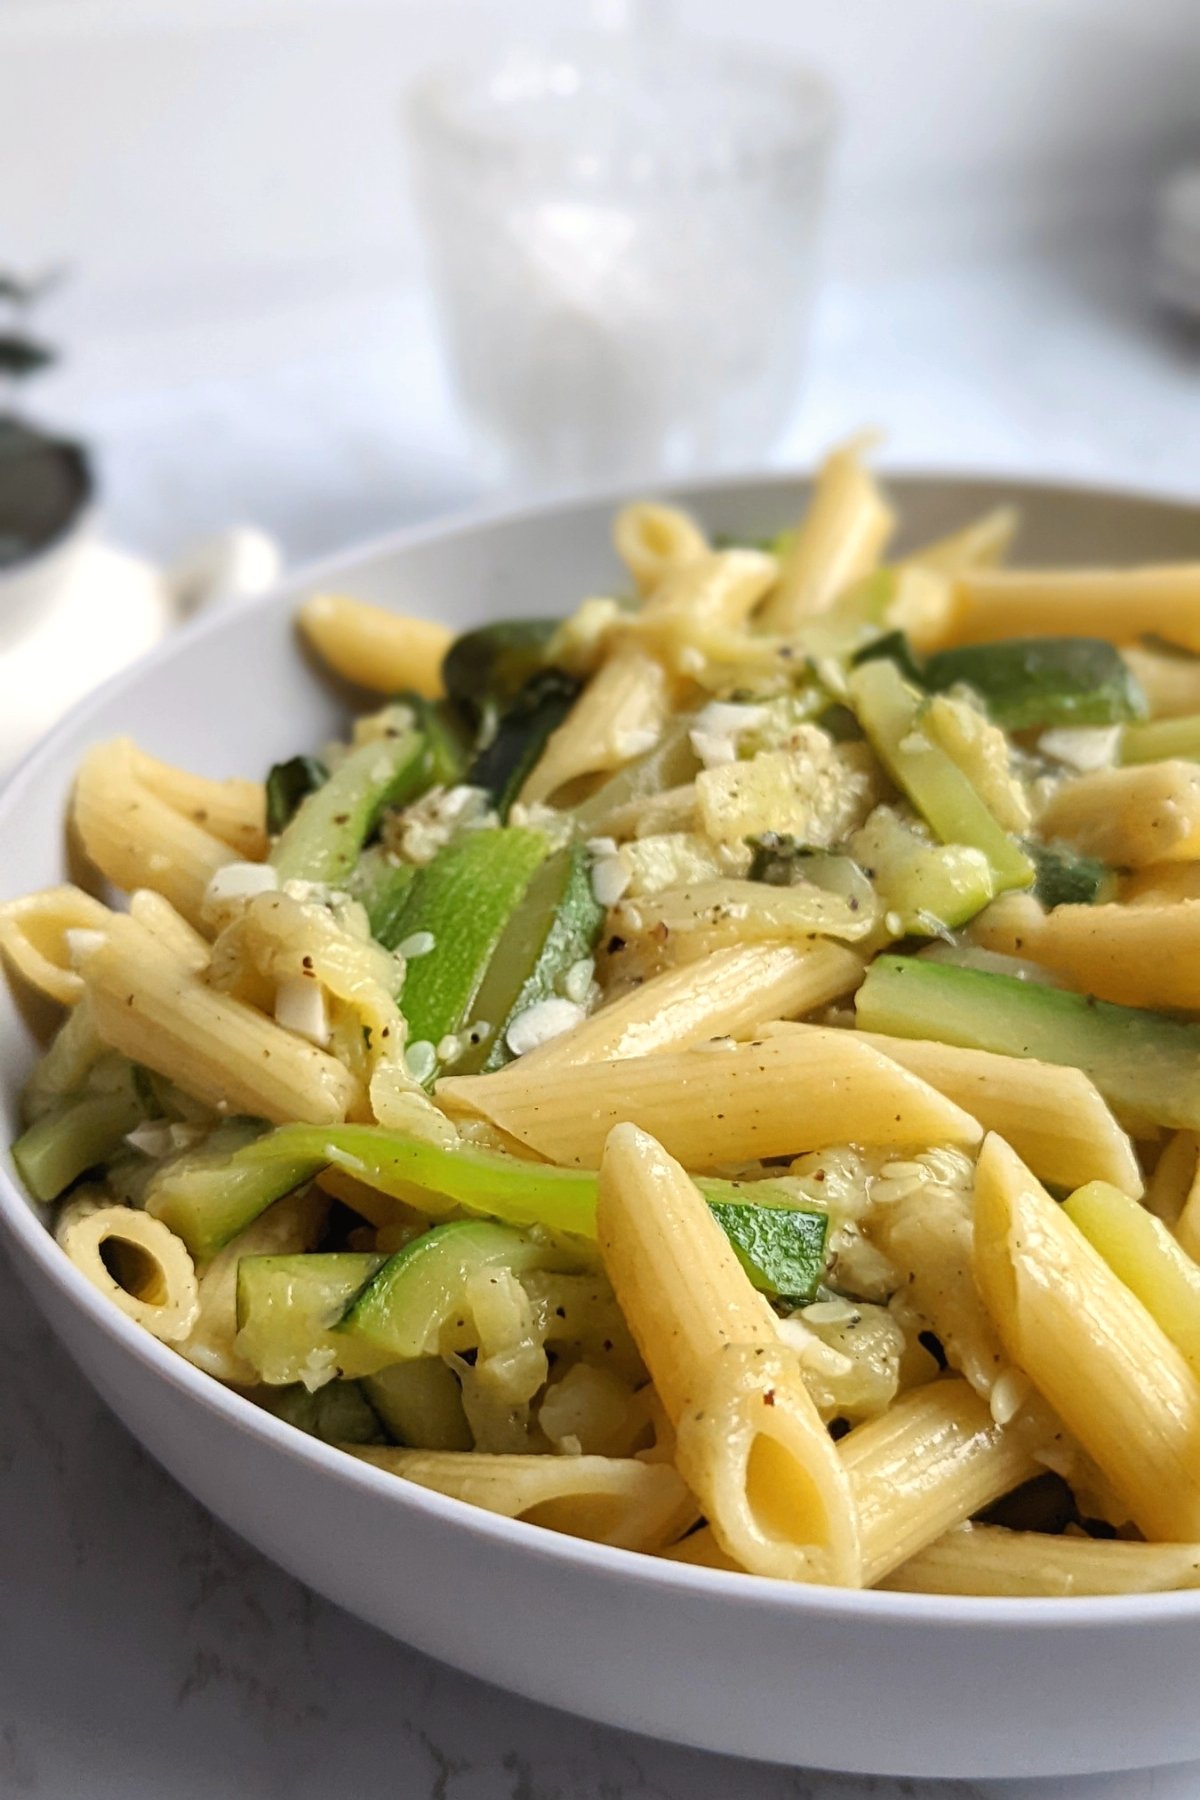 zummer squash pasta recipe with zucchini in butter sauce noodles and olive oil with vegetables in 30 minutes plant based and meatless summer dinner ideas